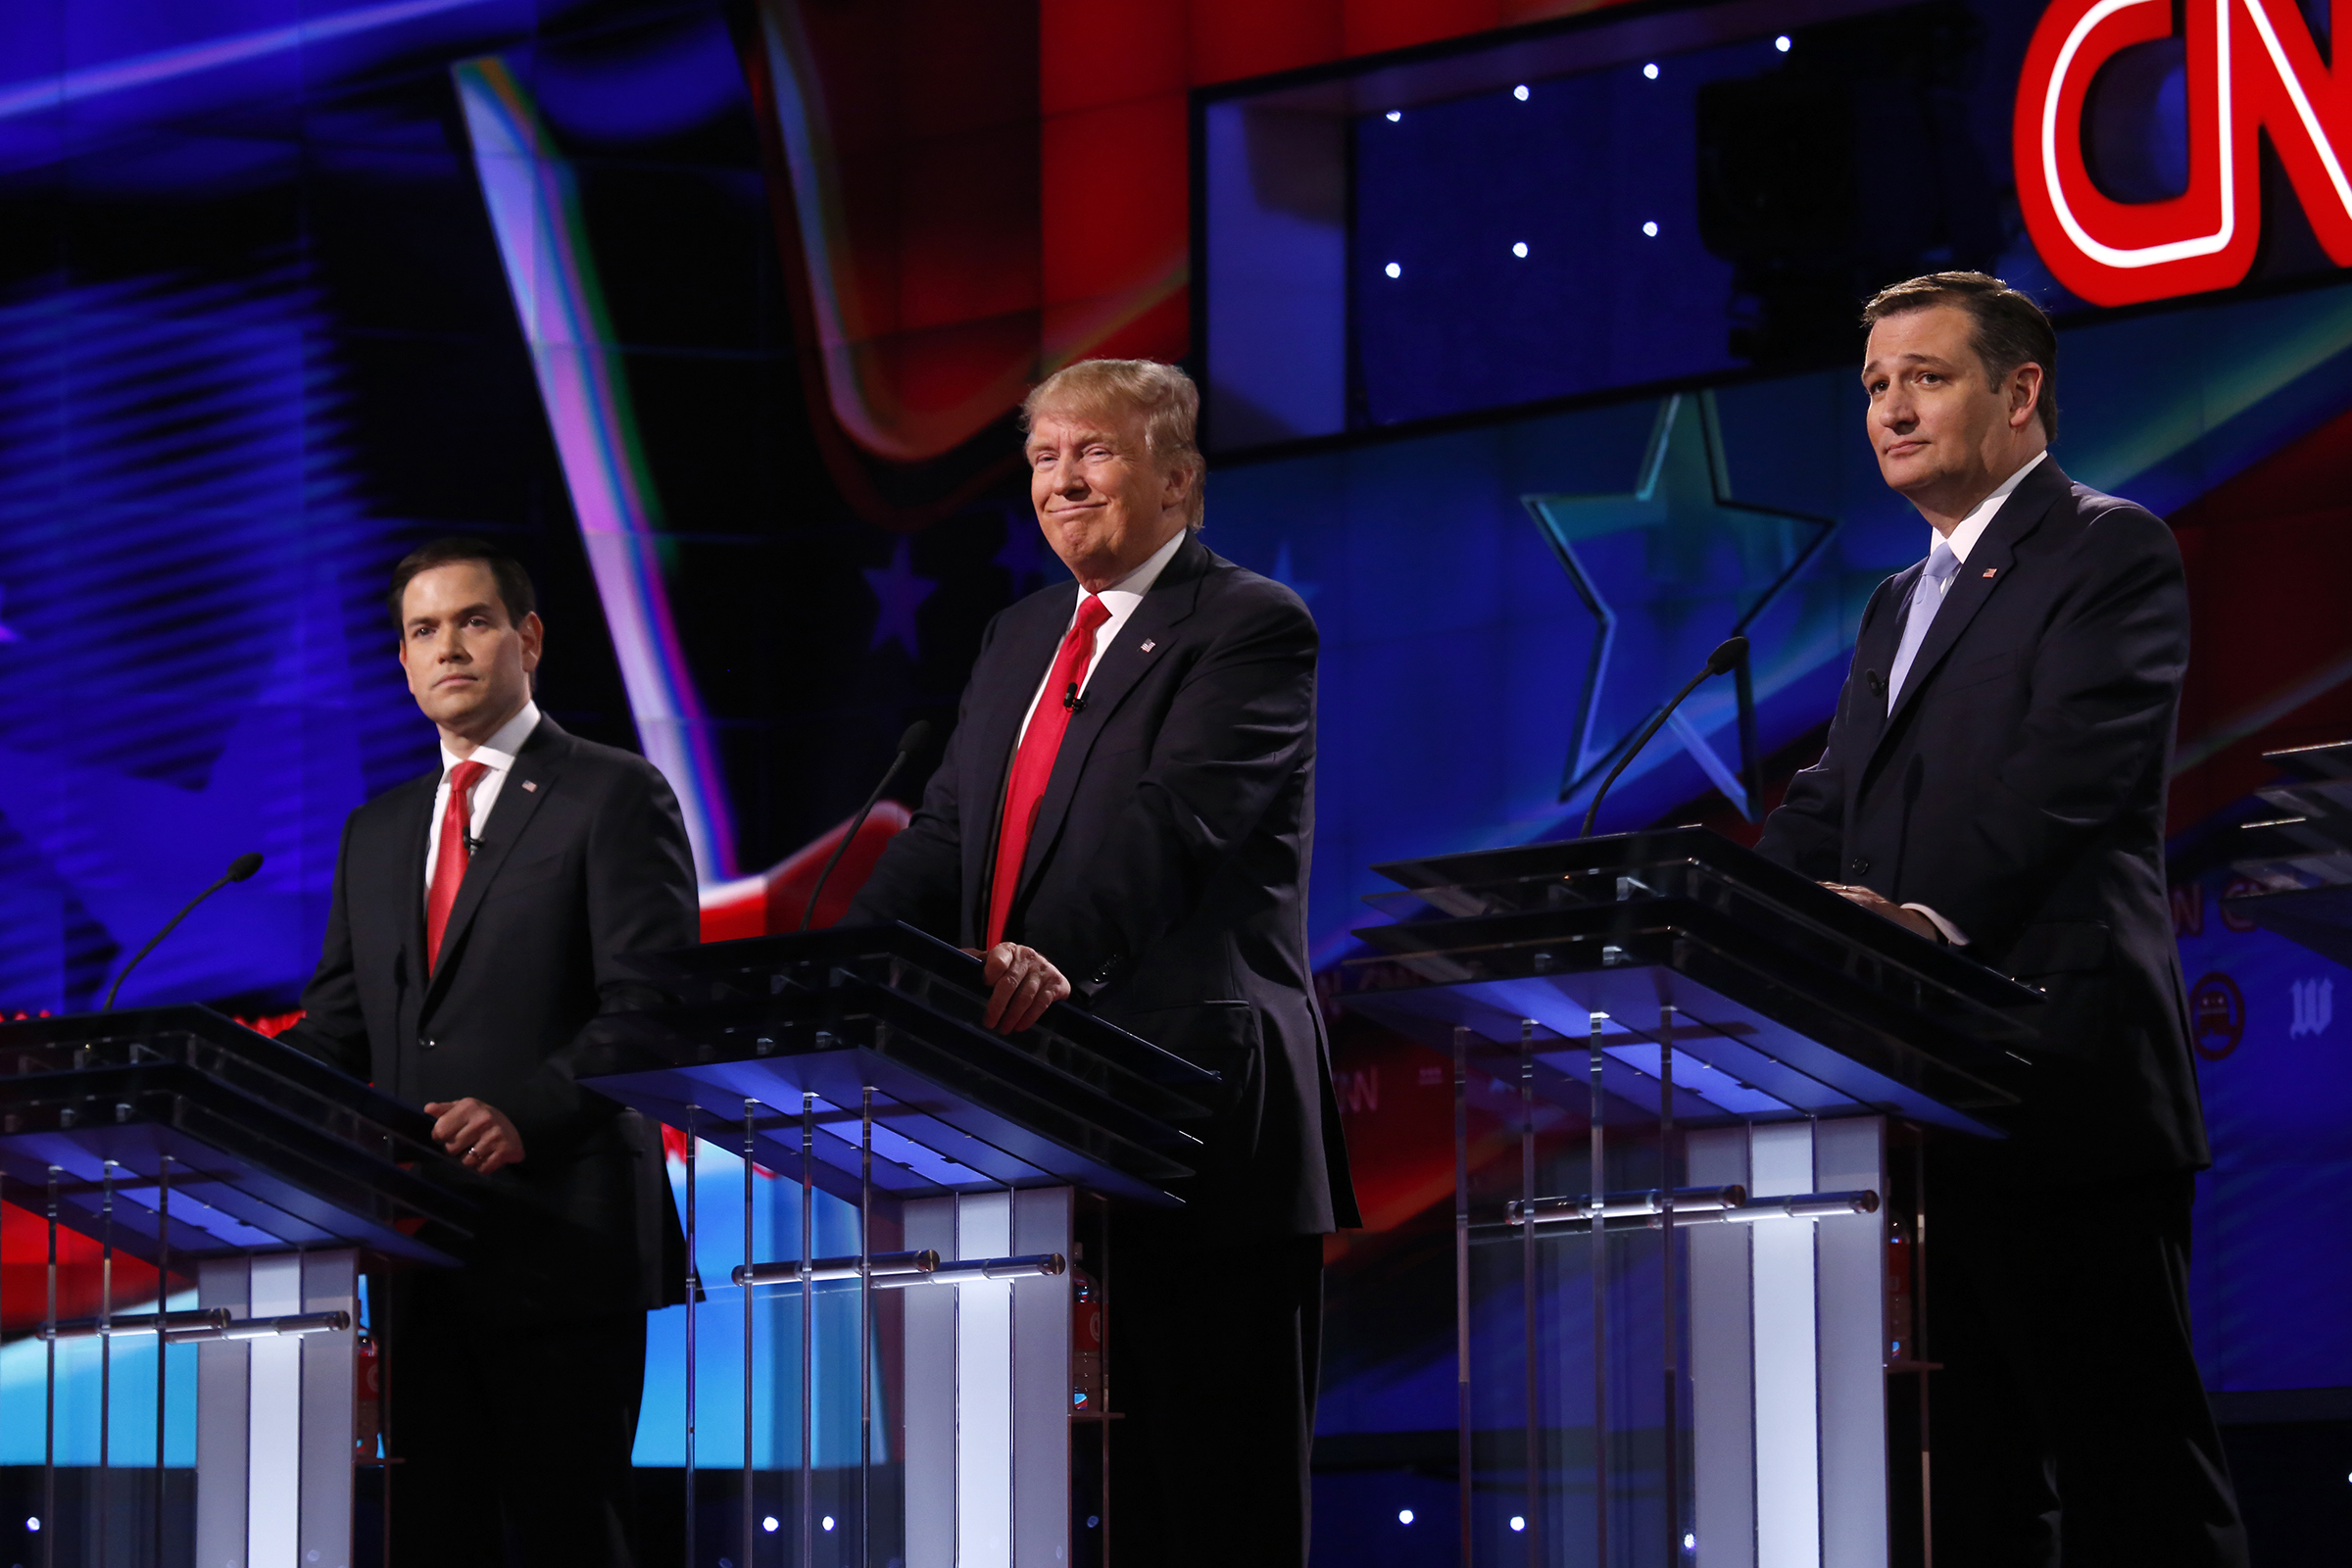 PHOTO: Marco Rubio, Donald Trump and Ted Cruz, take part in a debate, March 10, 2016.